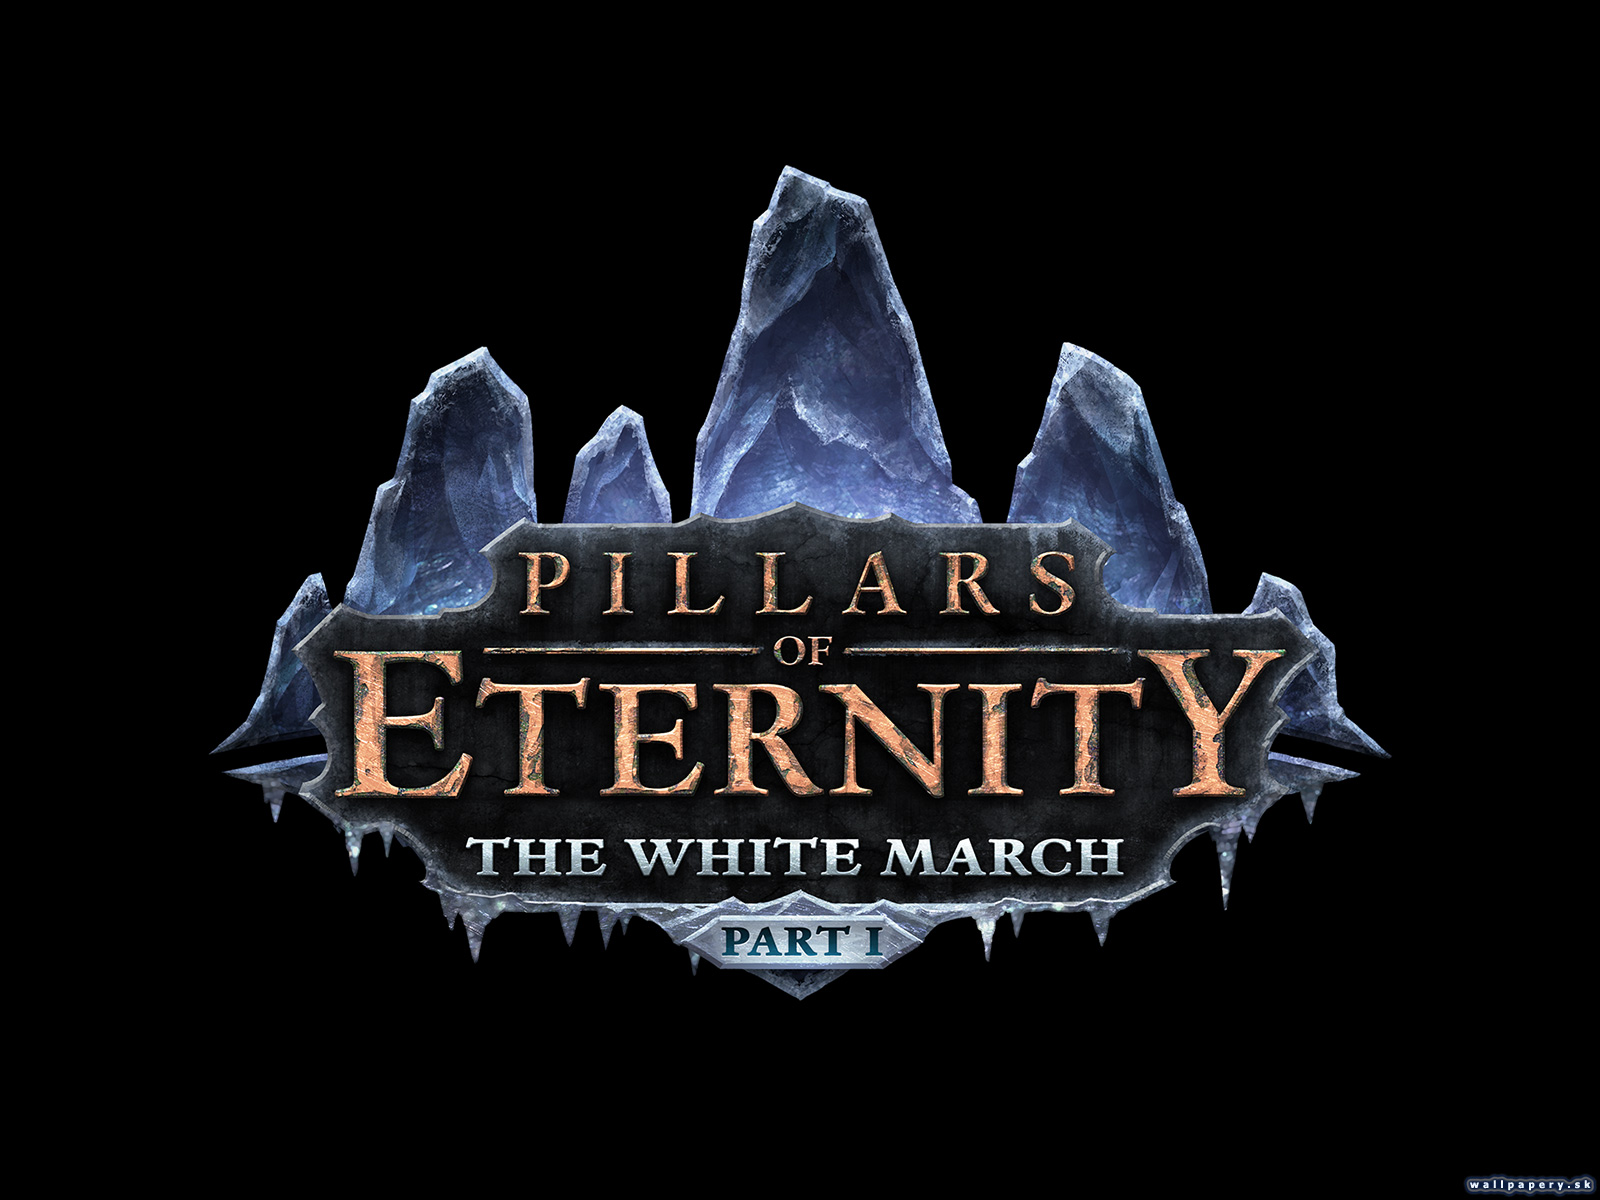 Pillars of Eternity - The White March: Part 1 - wallpaper 2